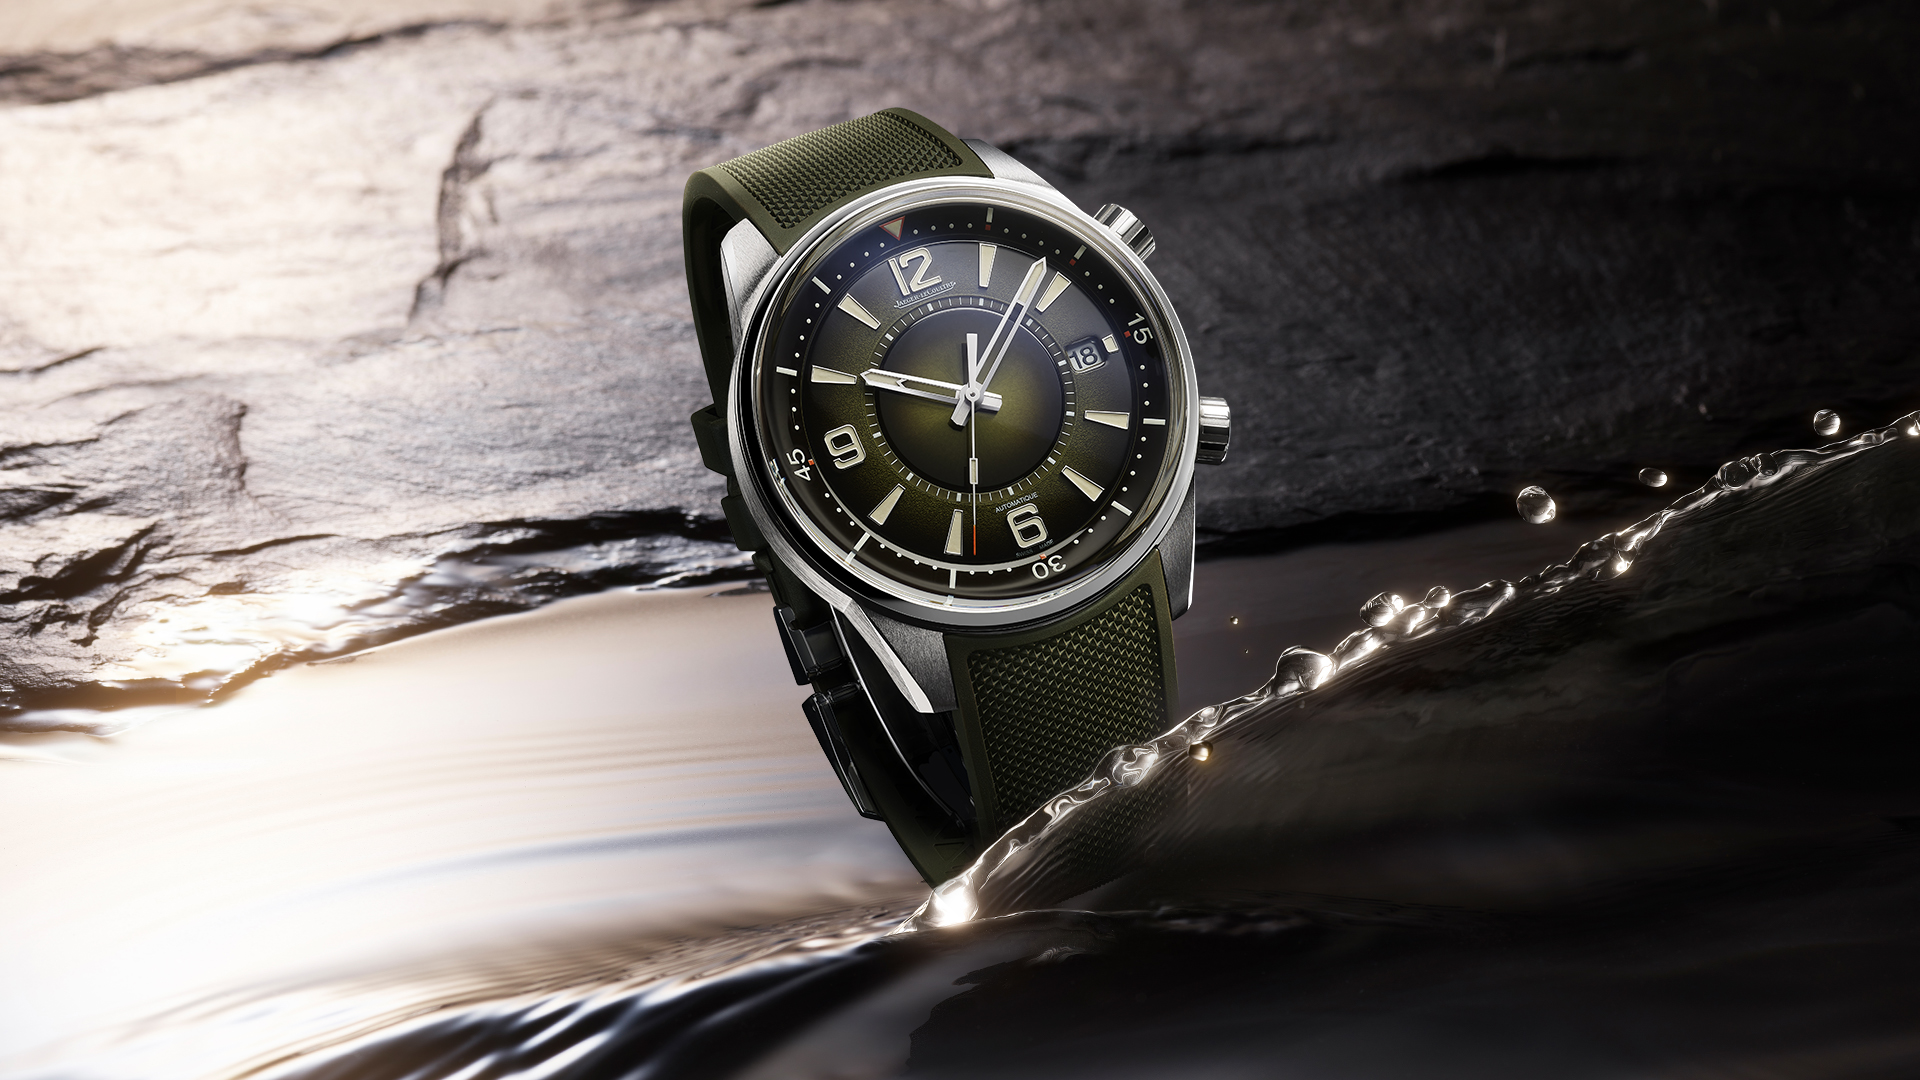 Jaeger-LeCoultre Automatic Date Green watch